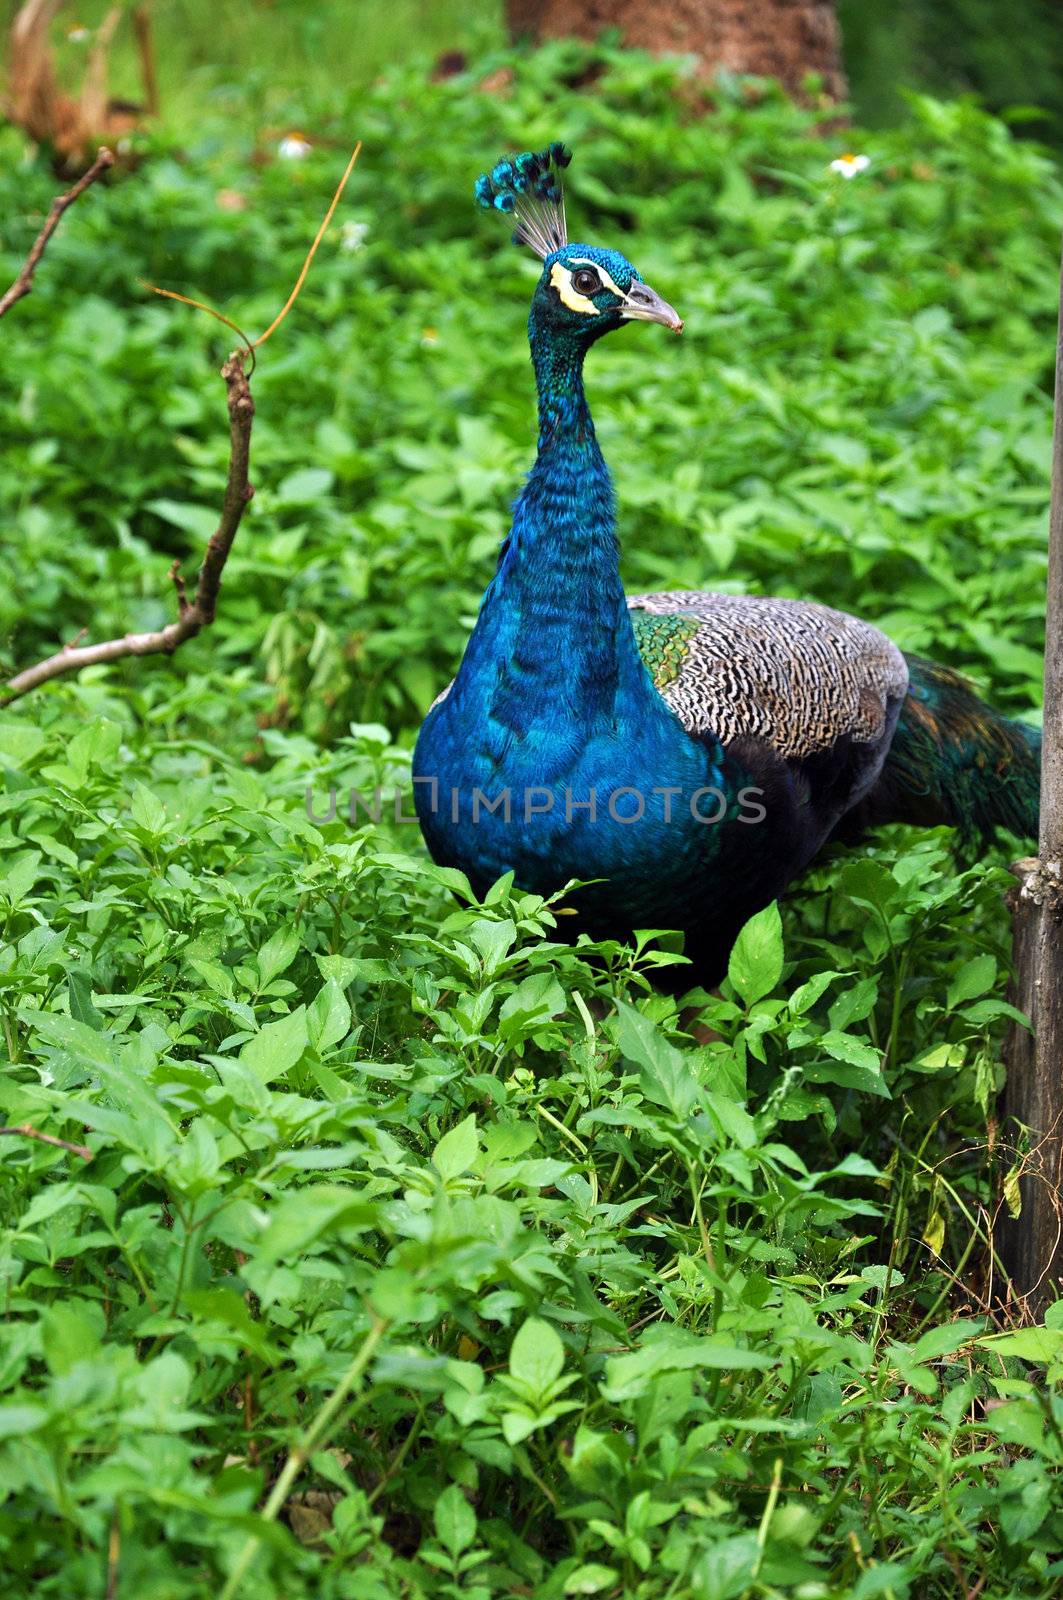 The peafowl are forest birds that nest on the ground but roost in trees. They are terrestrial feeders.